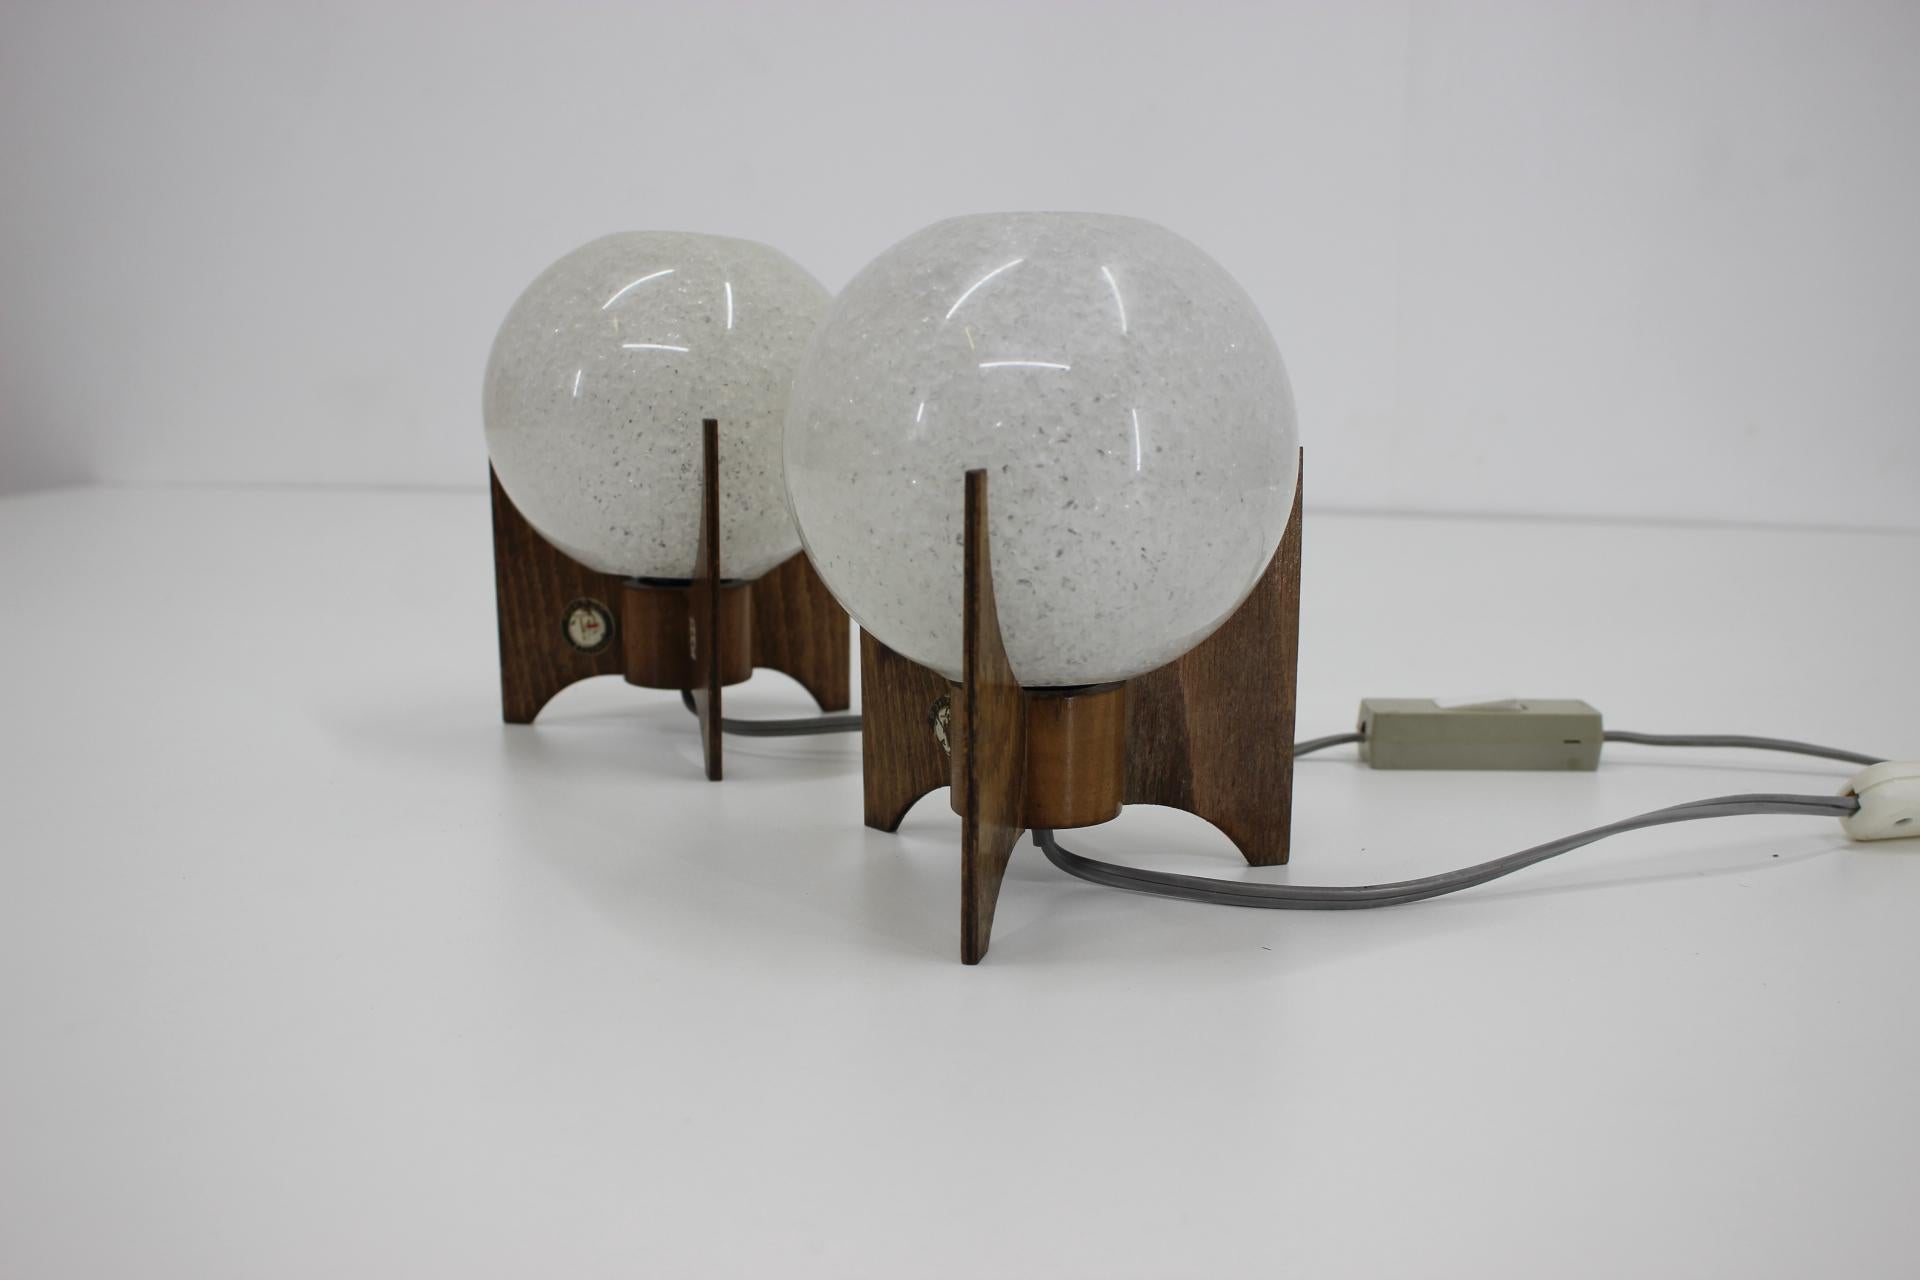 -wooden base and plastic globes
- good original condition.